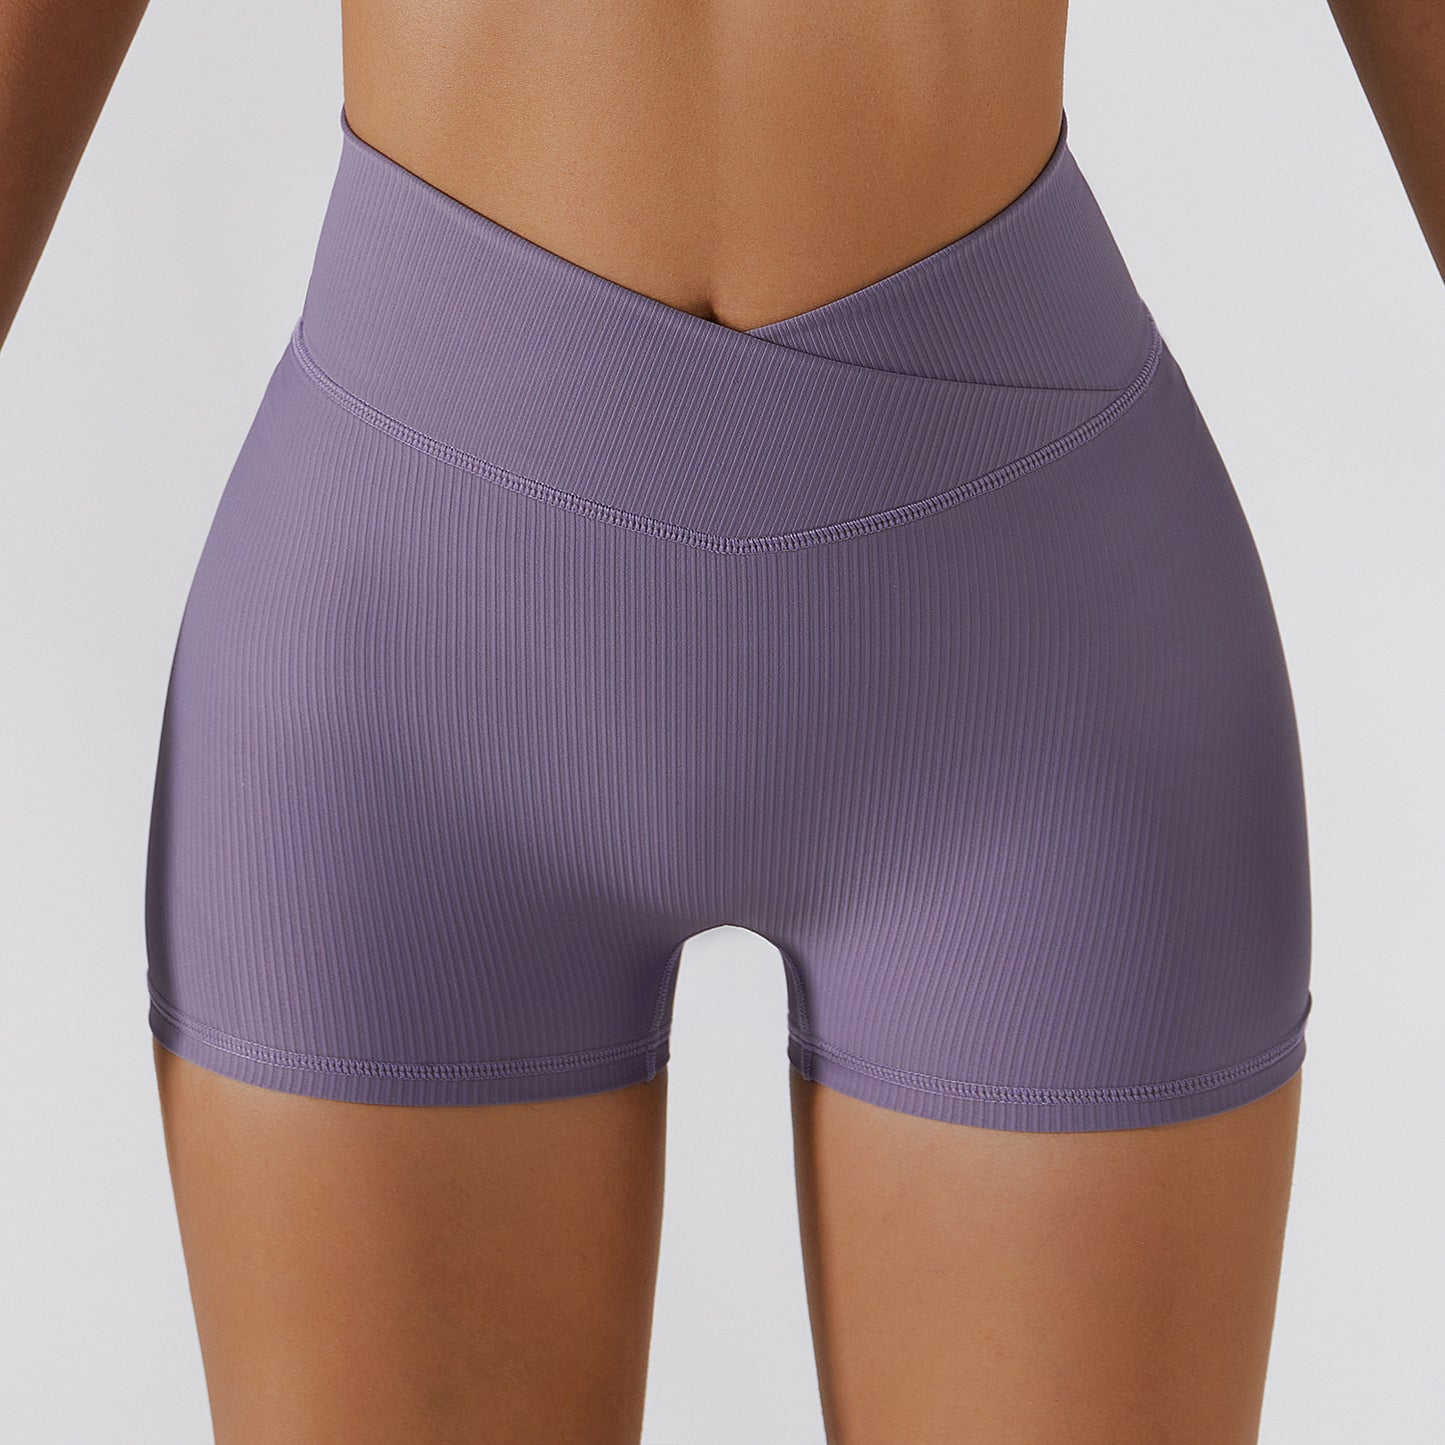 Running Fitness Shorts Sports Tights Breathable Quick-Drying Shorts